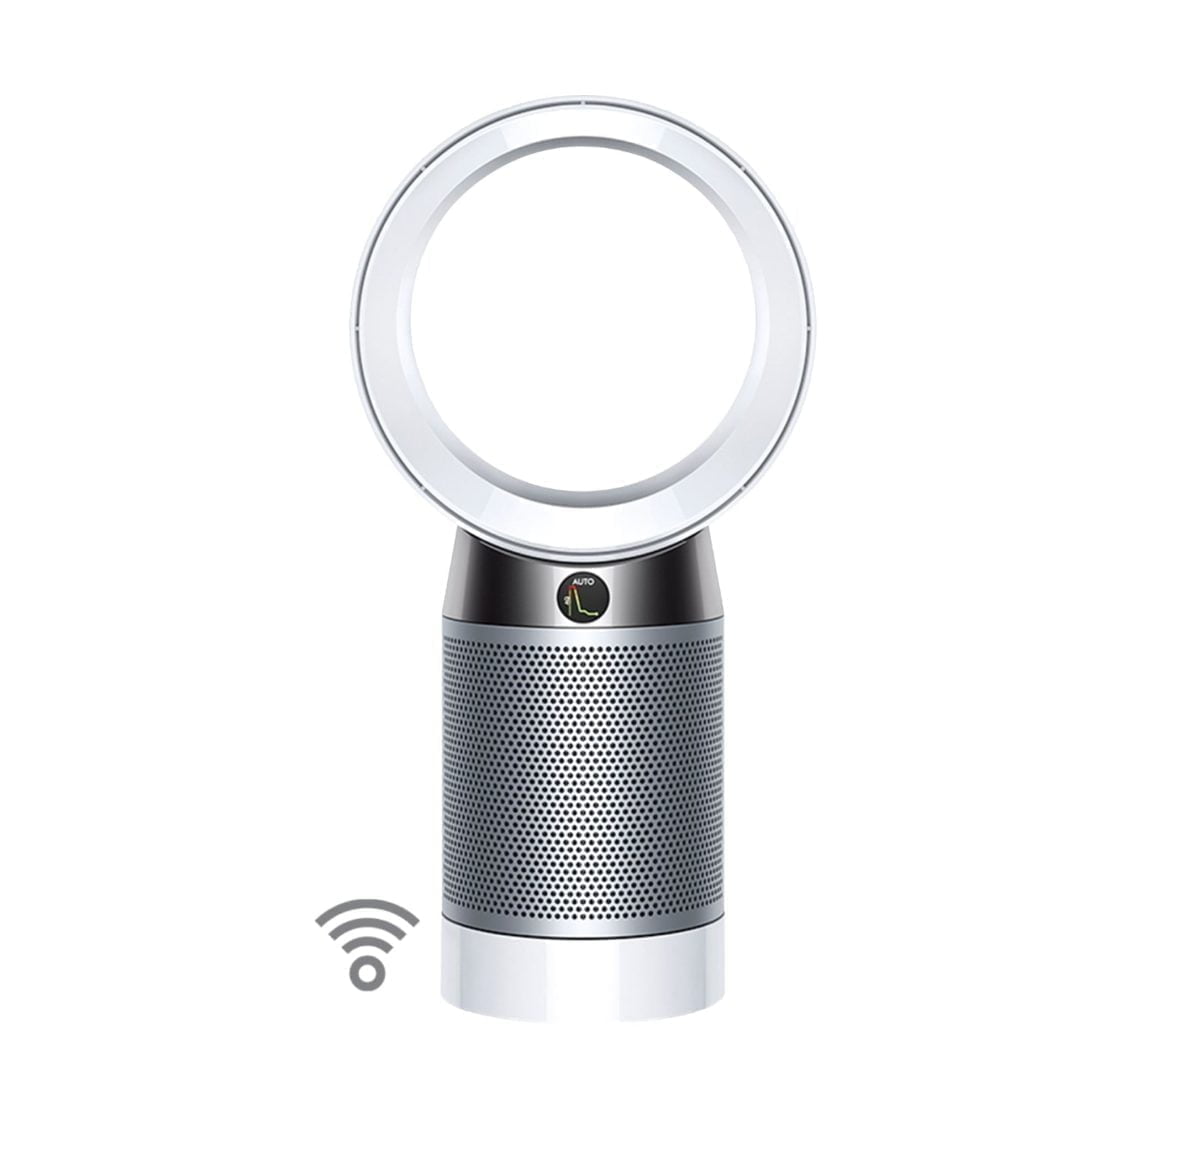 Dyson Pure Cool Dp04 Air Purifying Fan 800 Sq. Ft. (White/Silver)